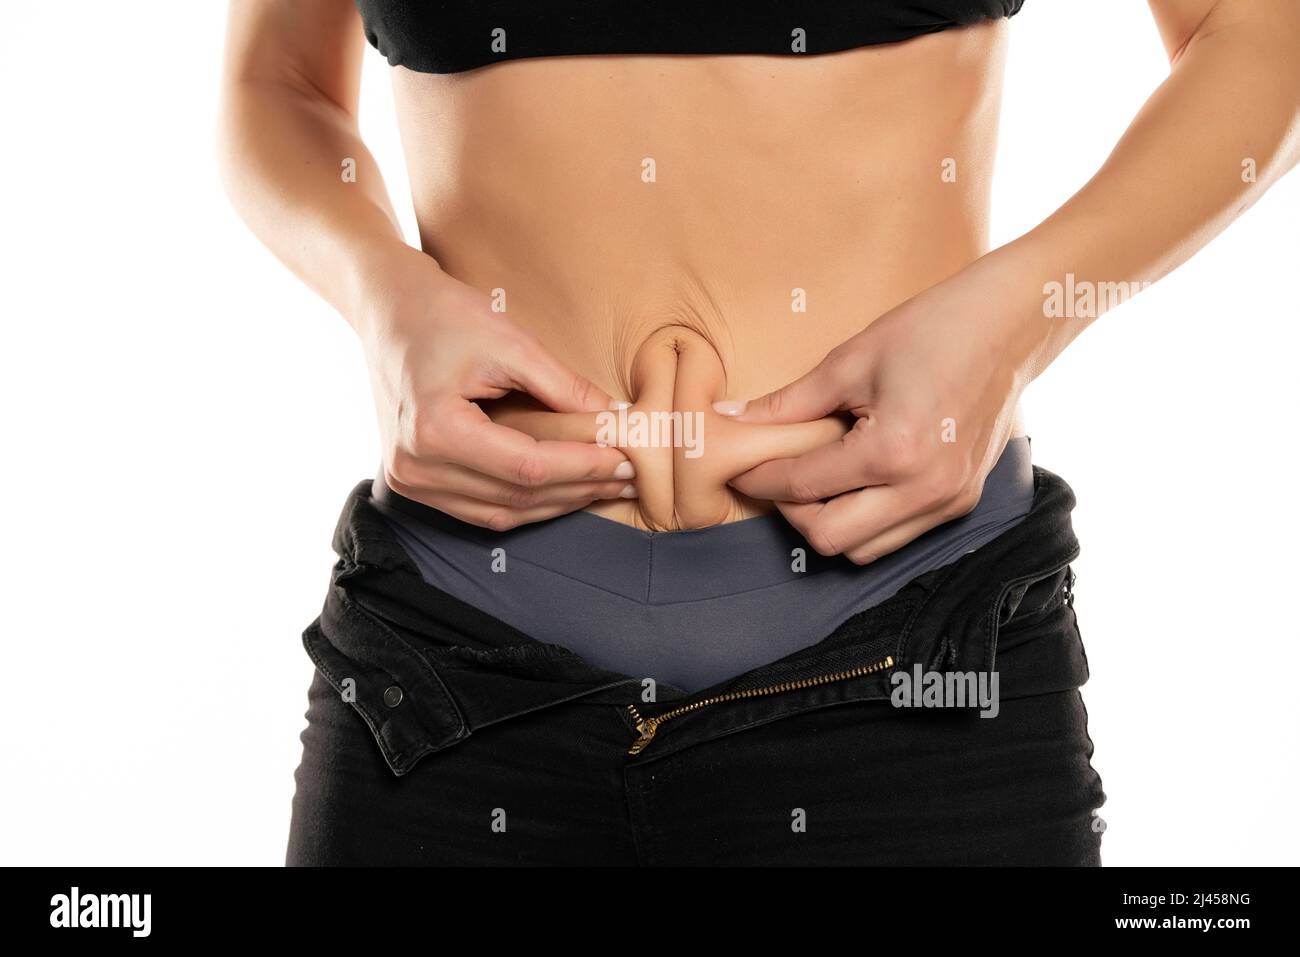 Closeup of a young fit woman pinching her belly on a white background. Stock Photo